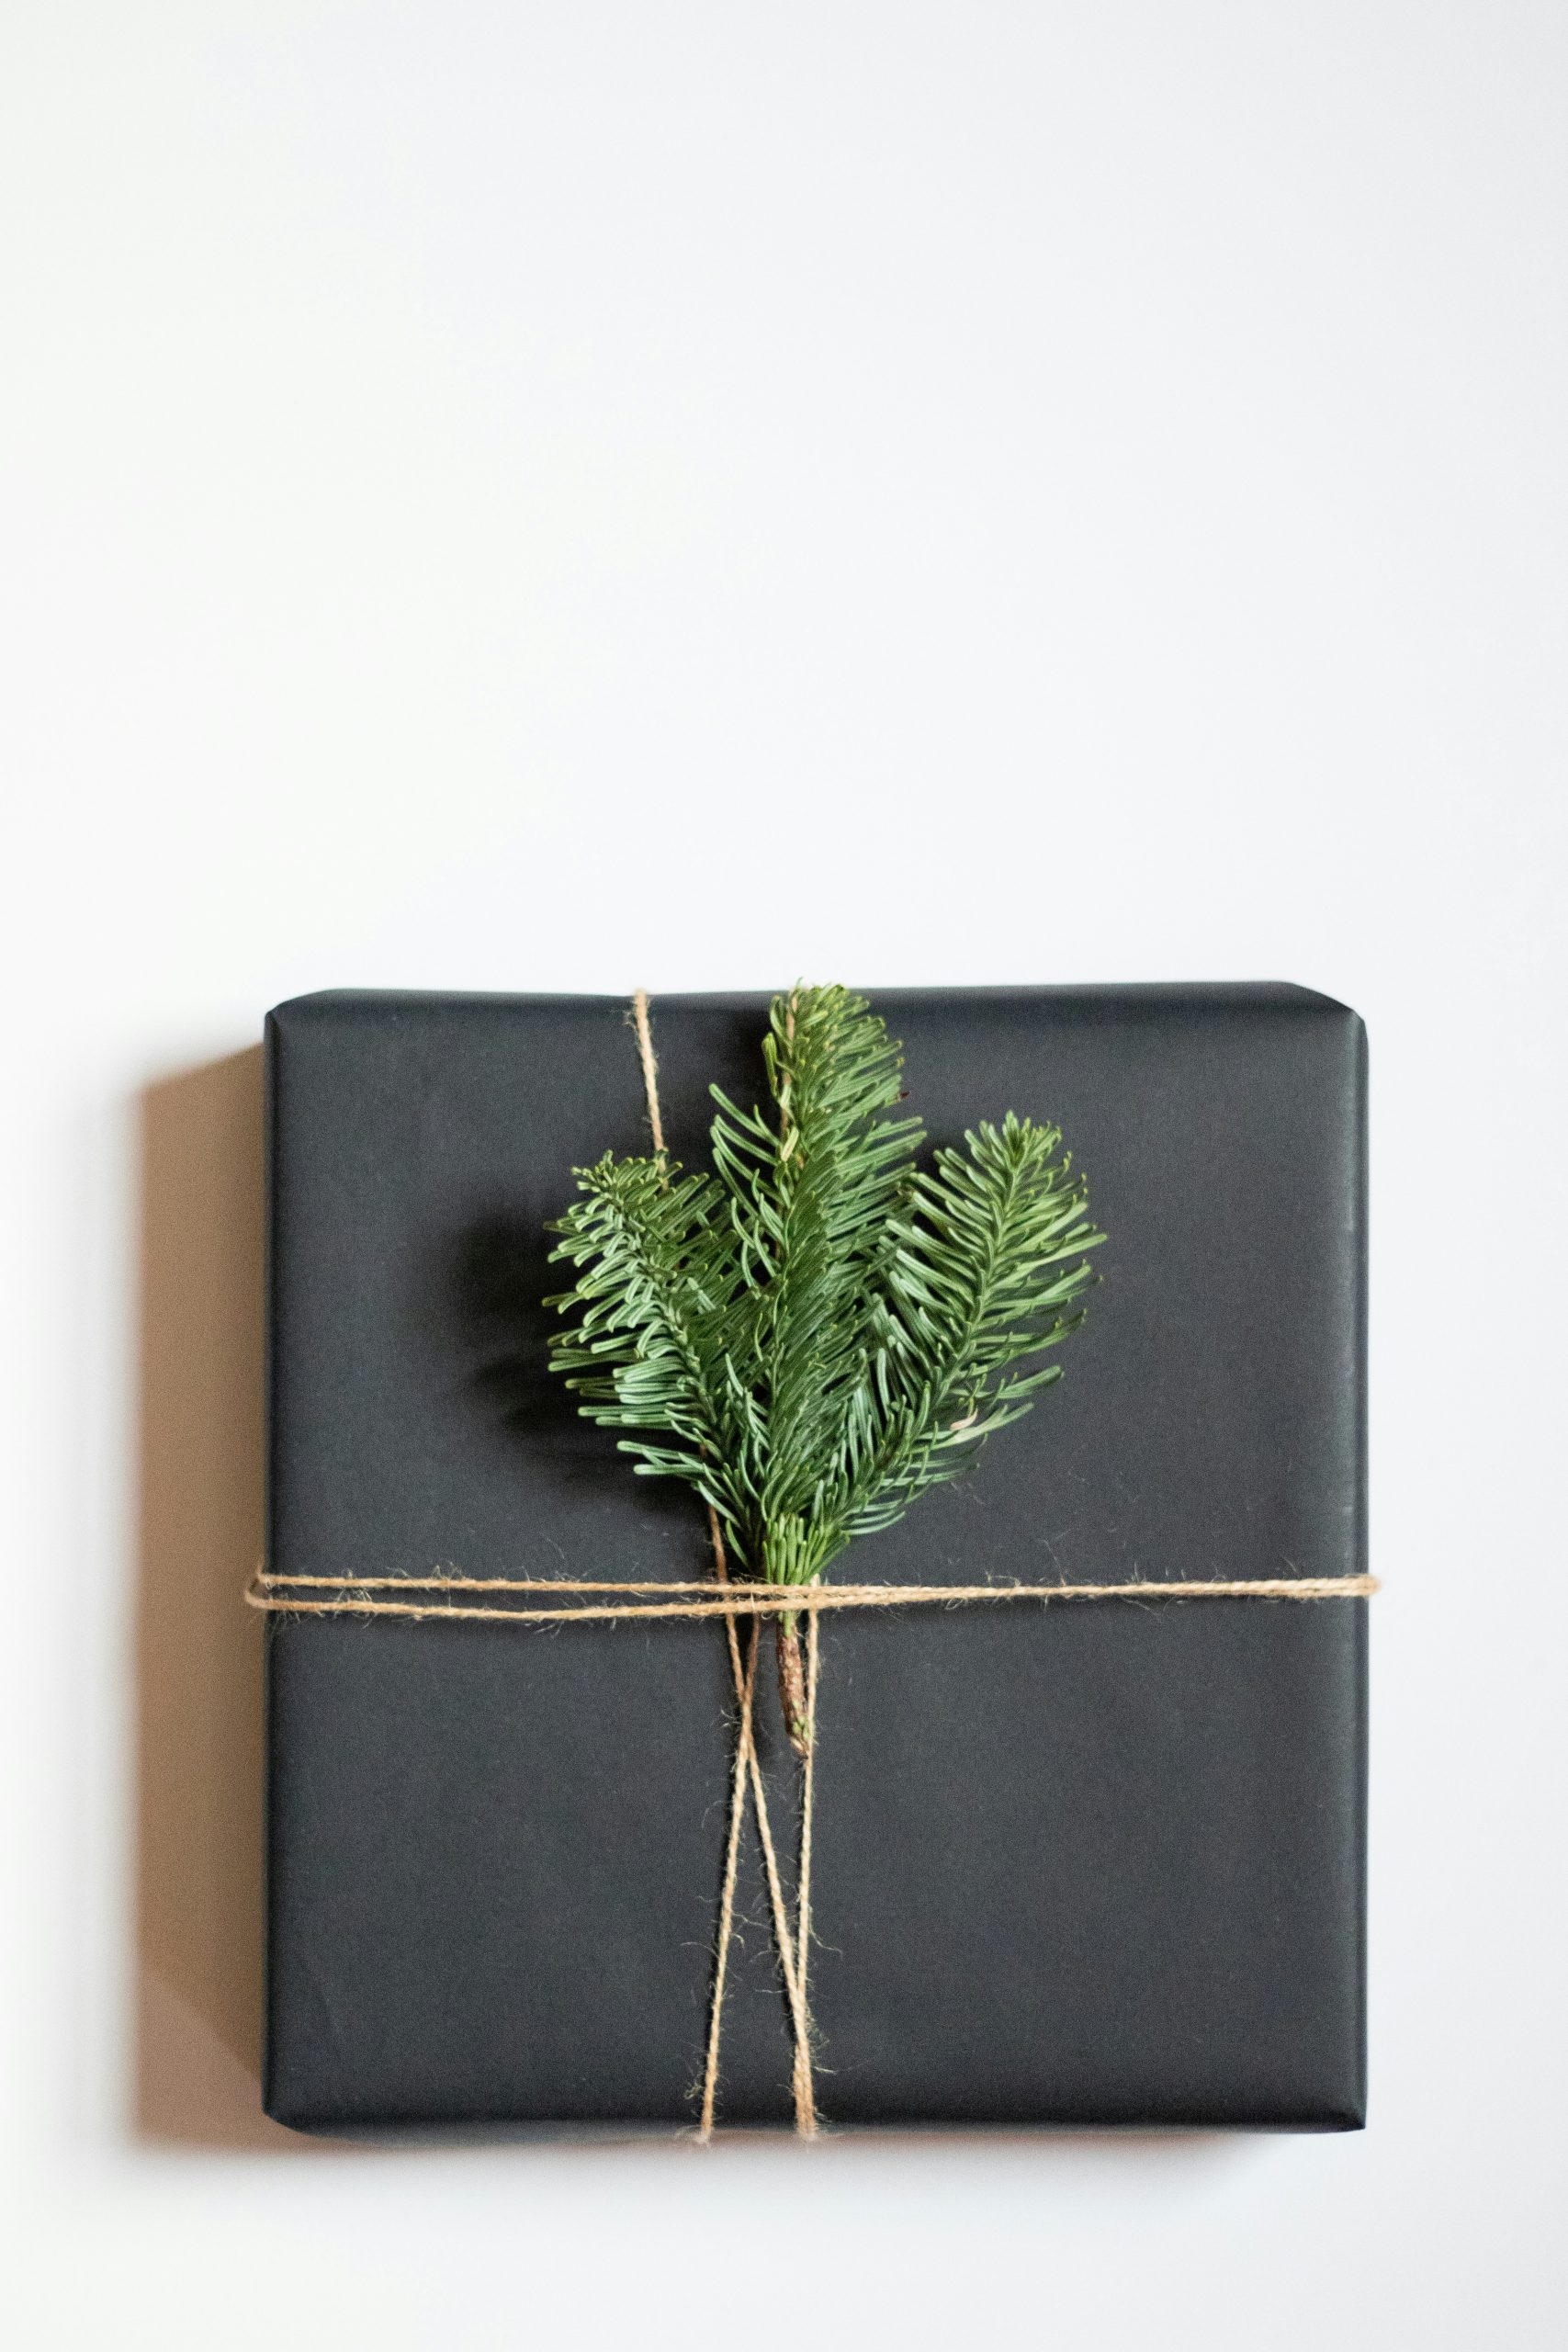 Ditch the Generic: Unique Gifting Ideas for Special Ones